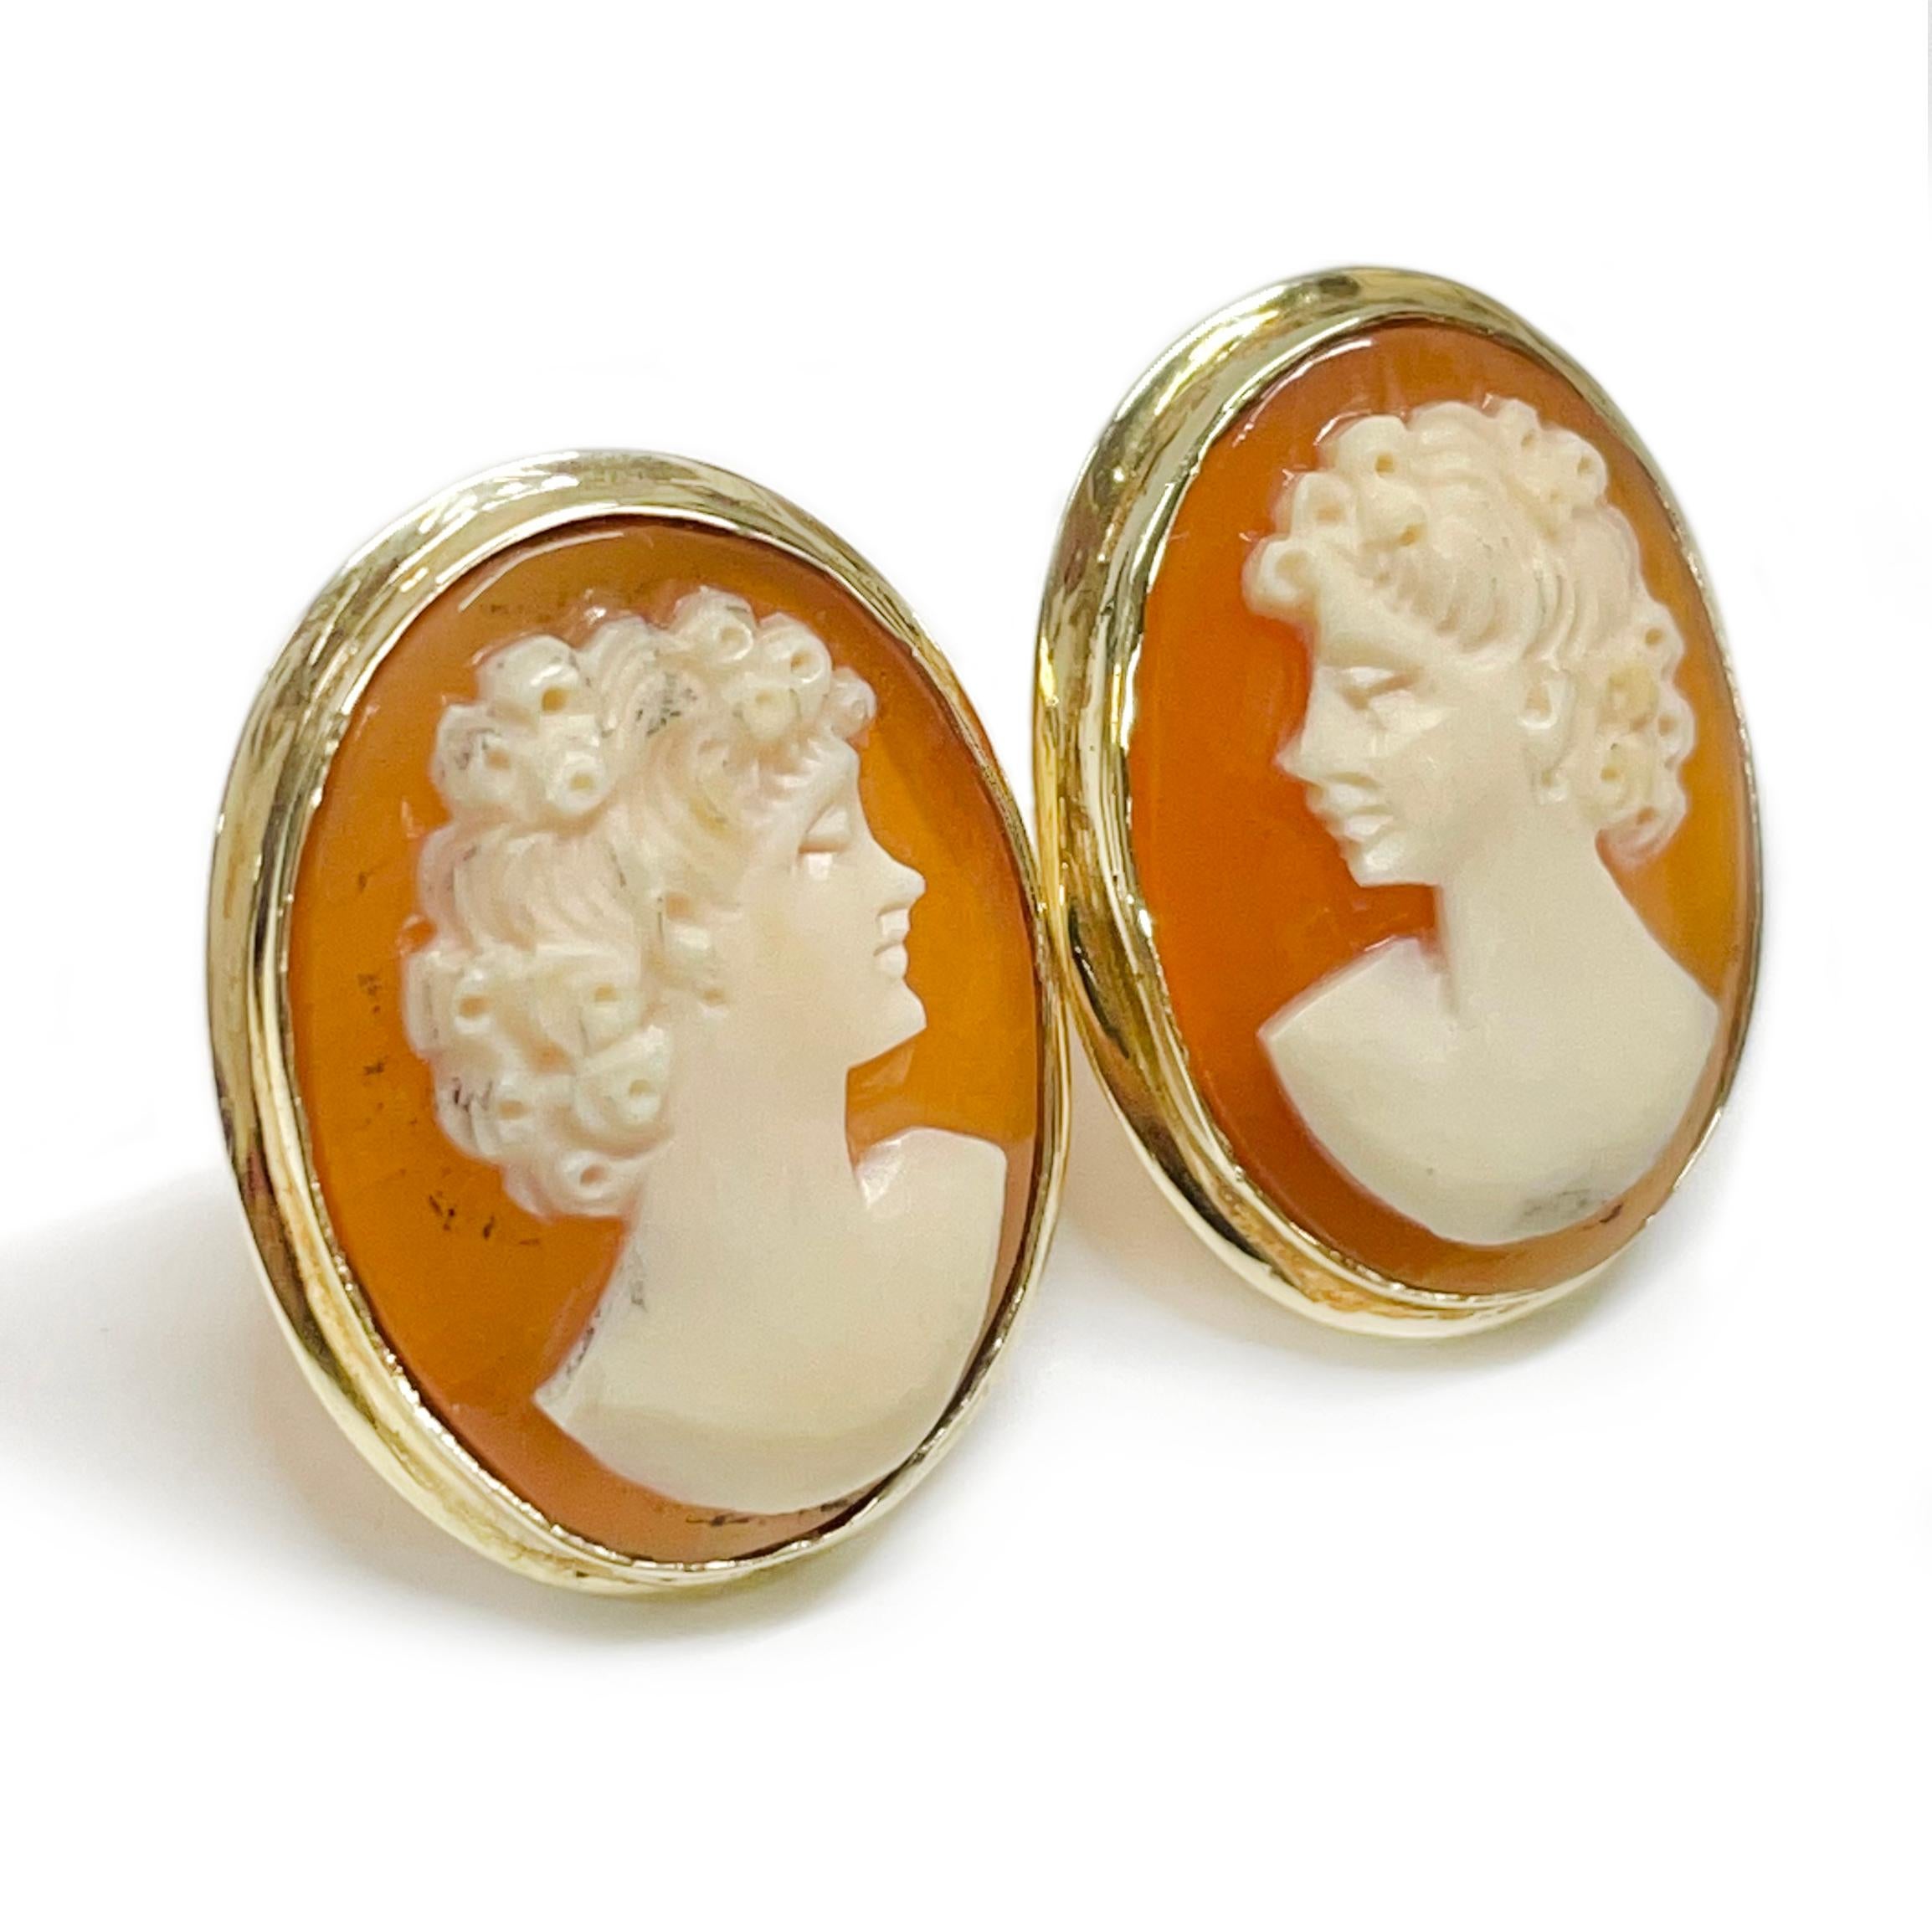 Vintage 14 Karat Shell Cameo Earrings. The earrings feature a bezel-set traditional lady cameo with post and Omega clip back. Each earring measures approximately 20 x 15mm. On one earring the lady is facing left and on the other the lady is facing